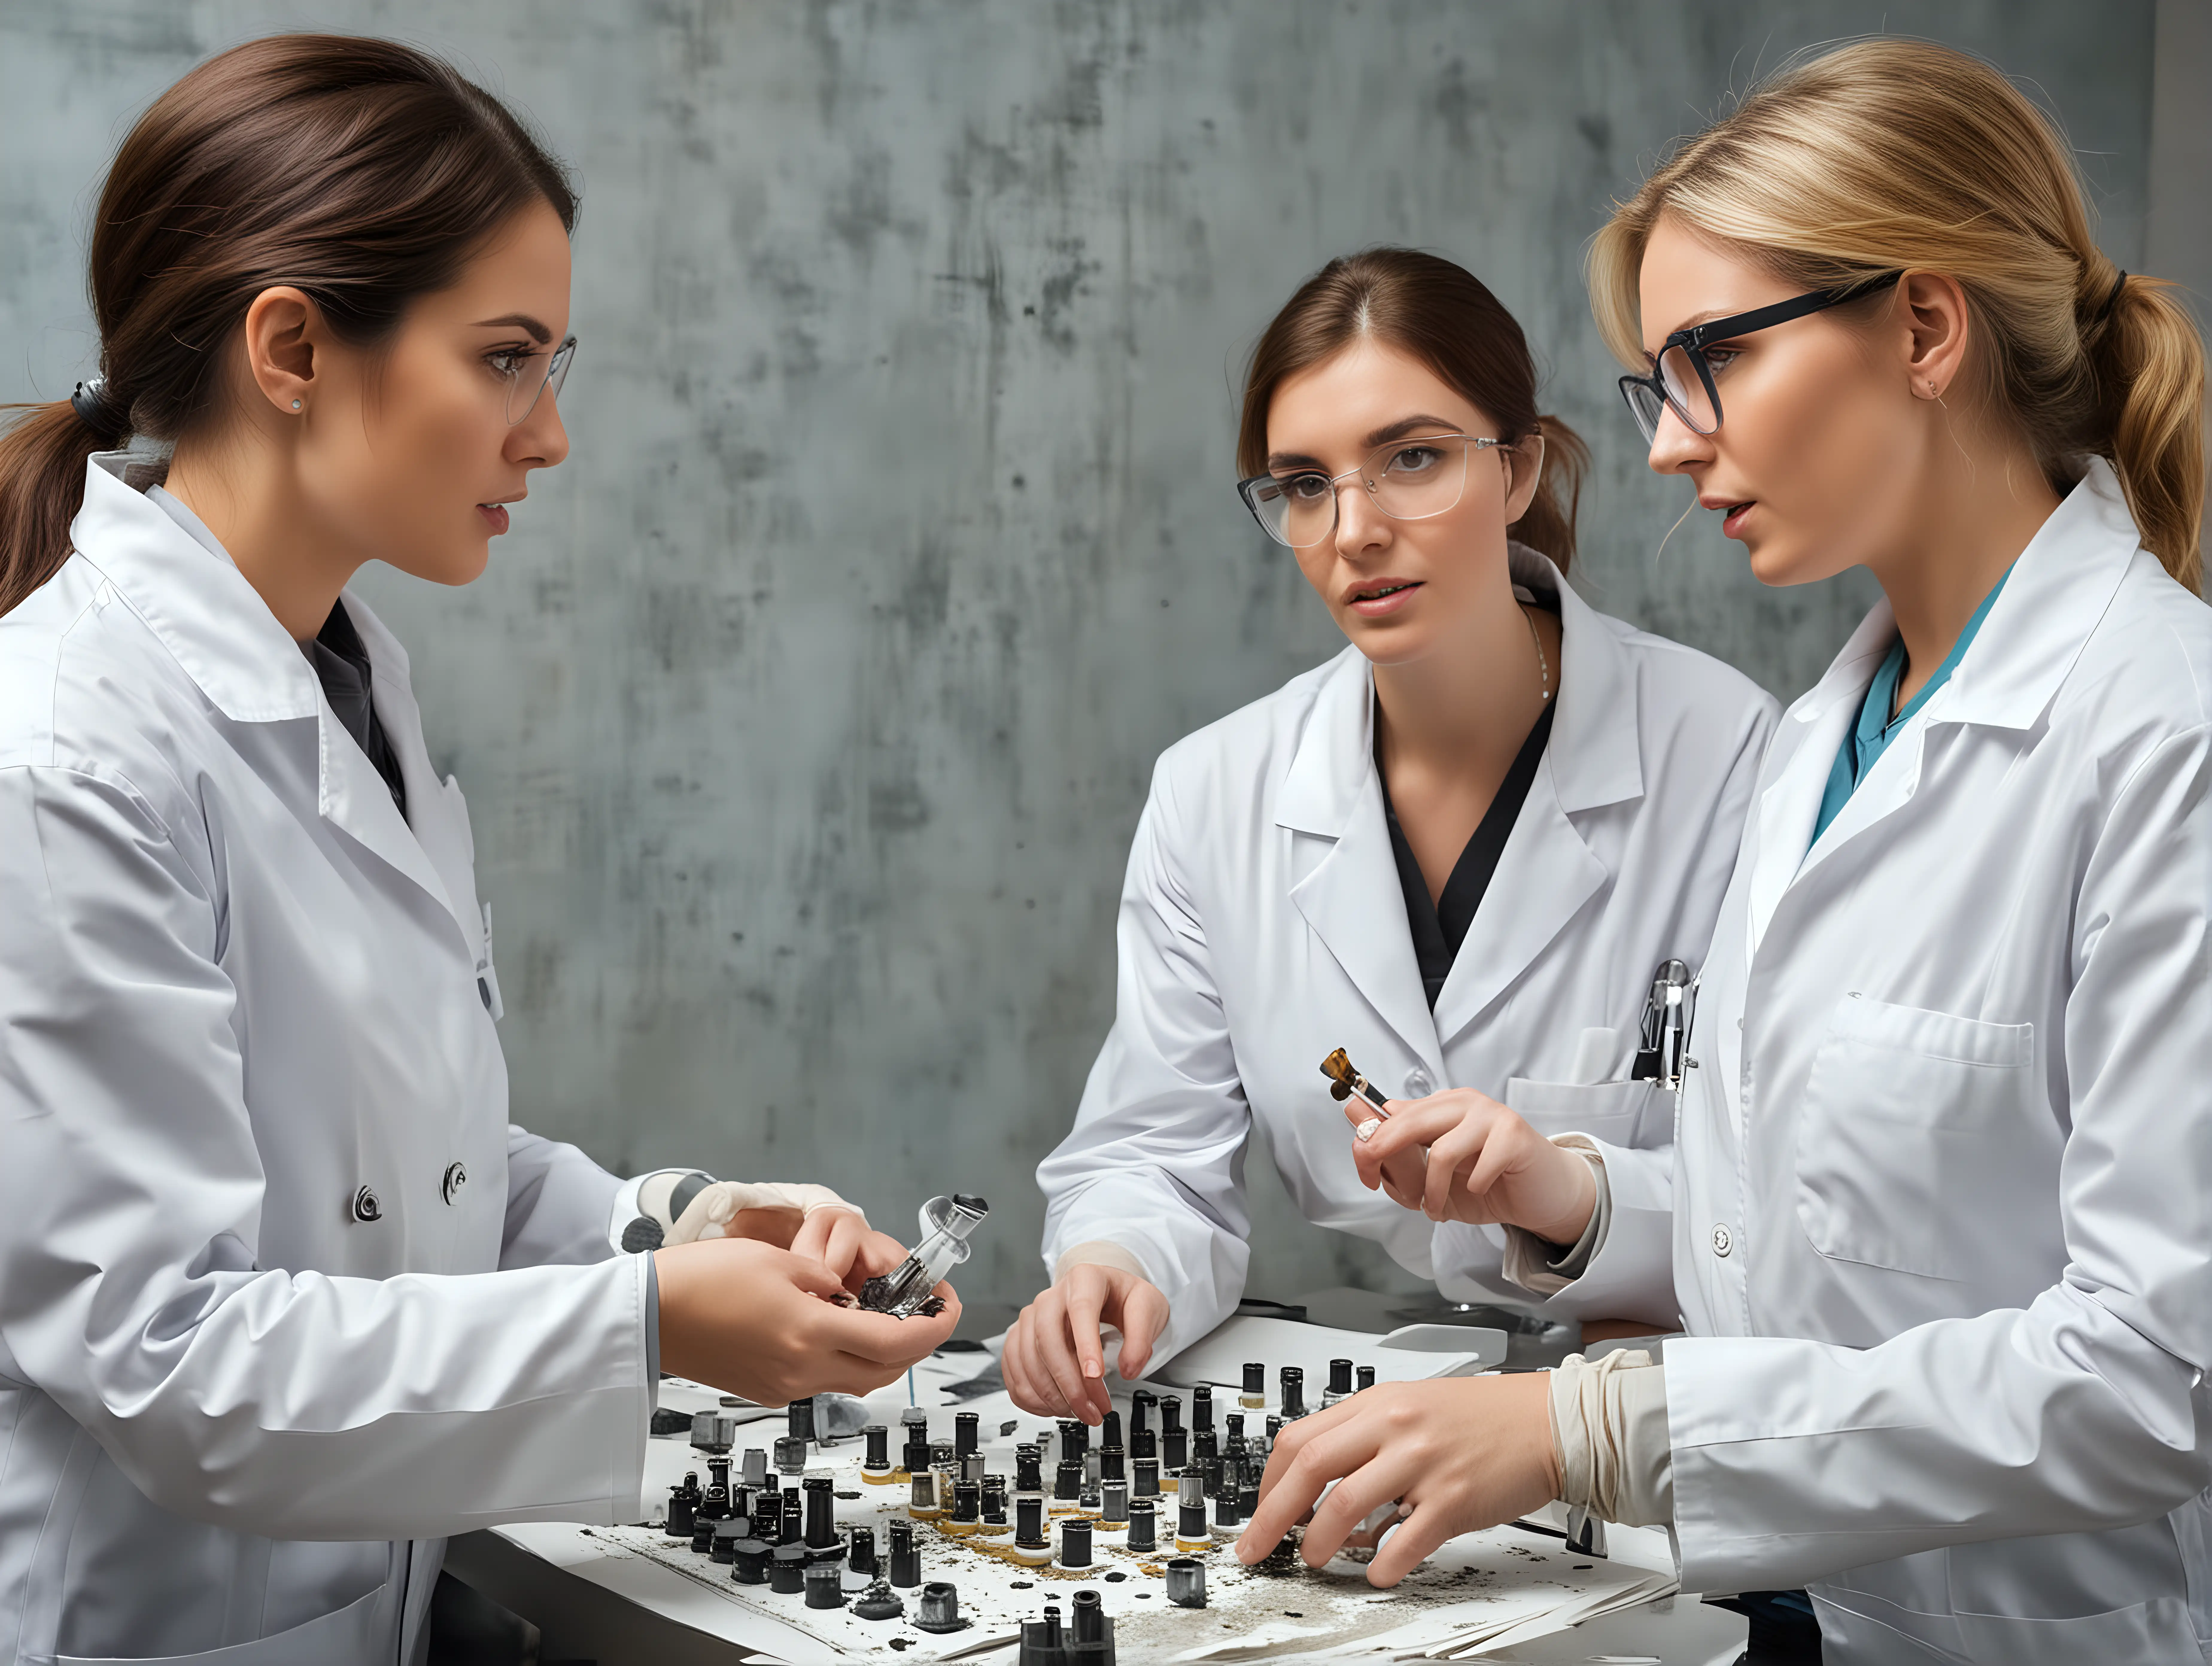 large breasted women scientists discussing mold toxicity